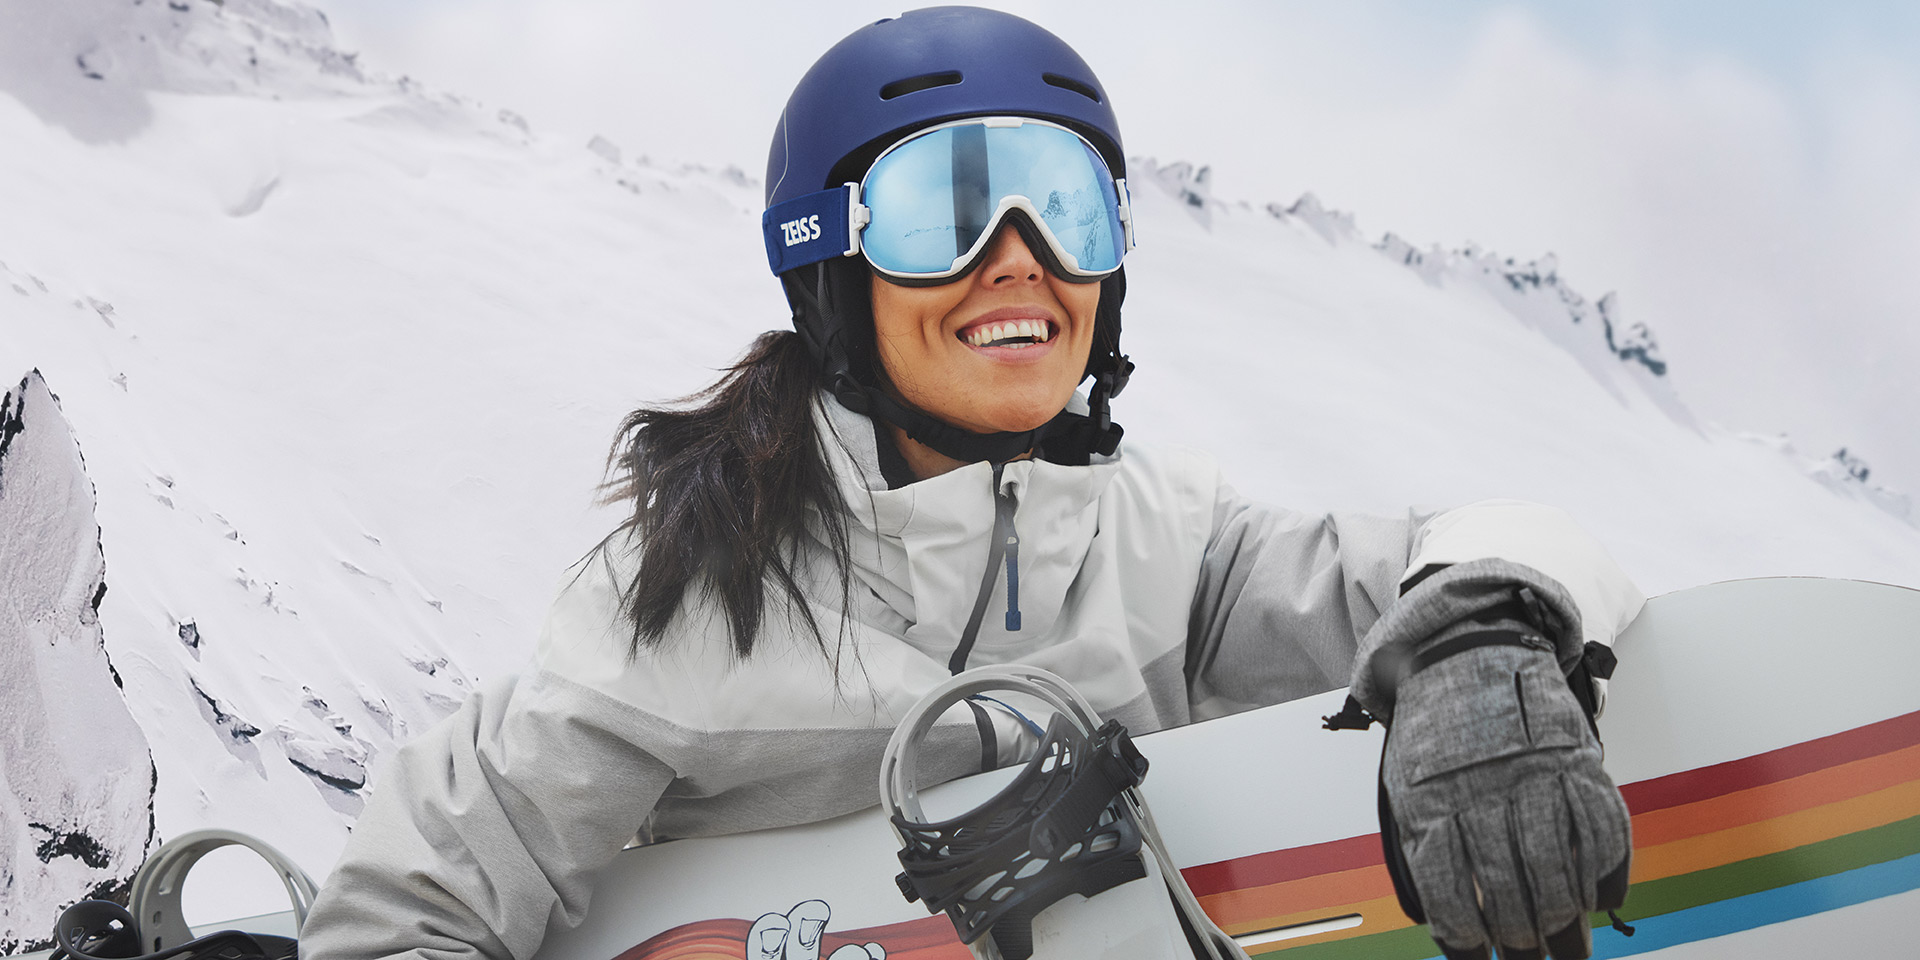 ZEISS Snow goggles